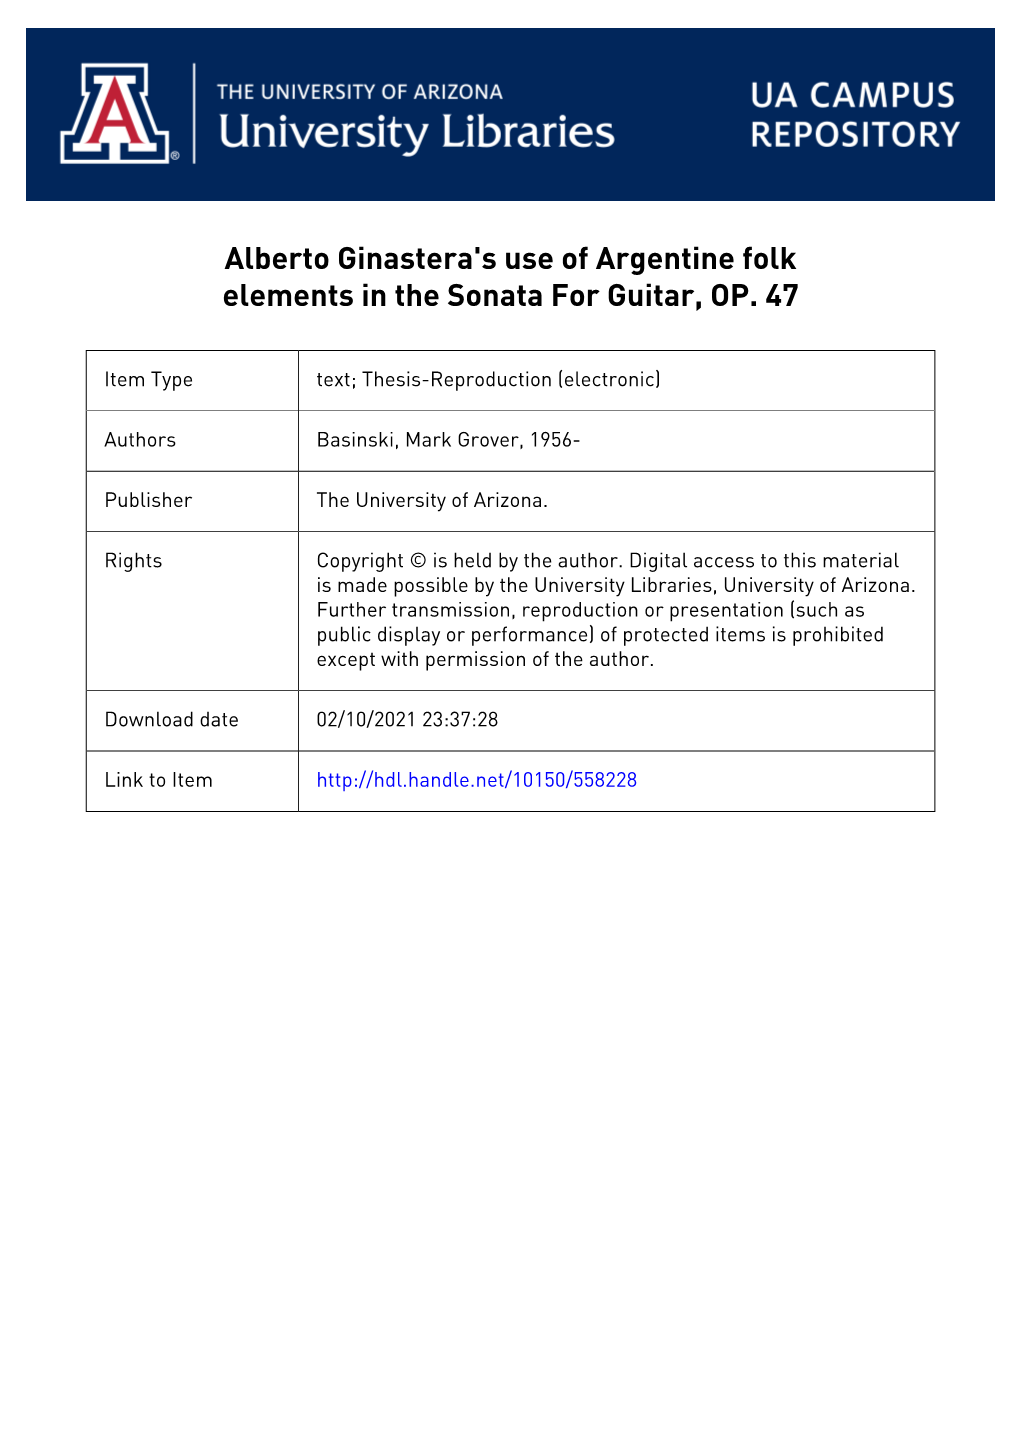 Alberto Ginastera's Use of Argentine Folk Elements in the Sonata for Guitar, OP